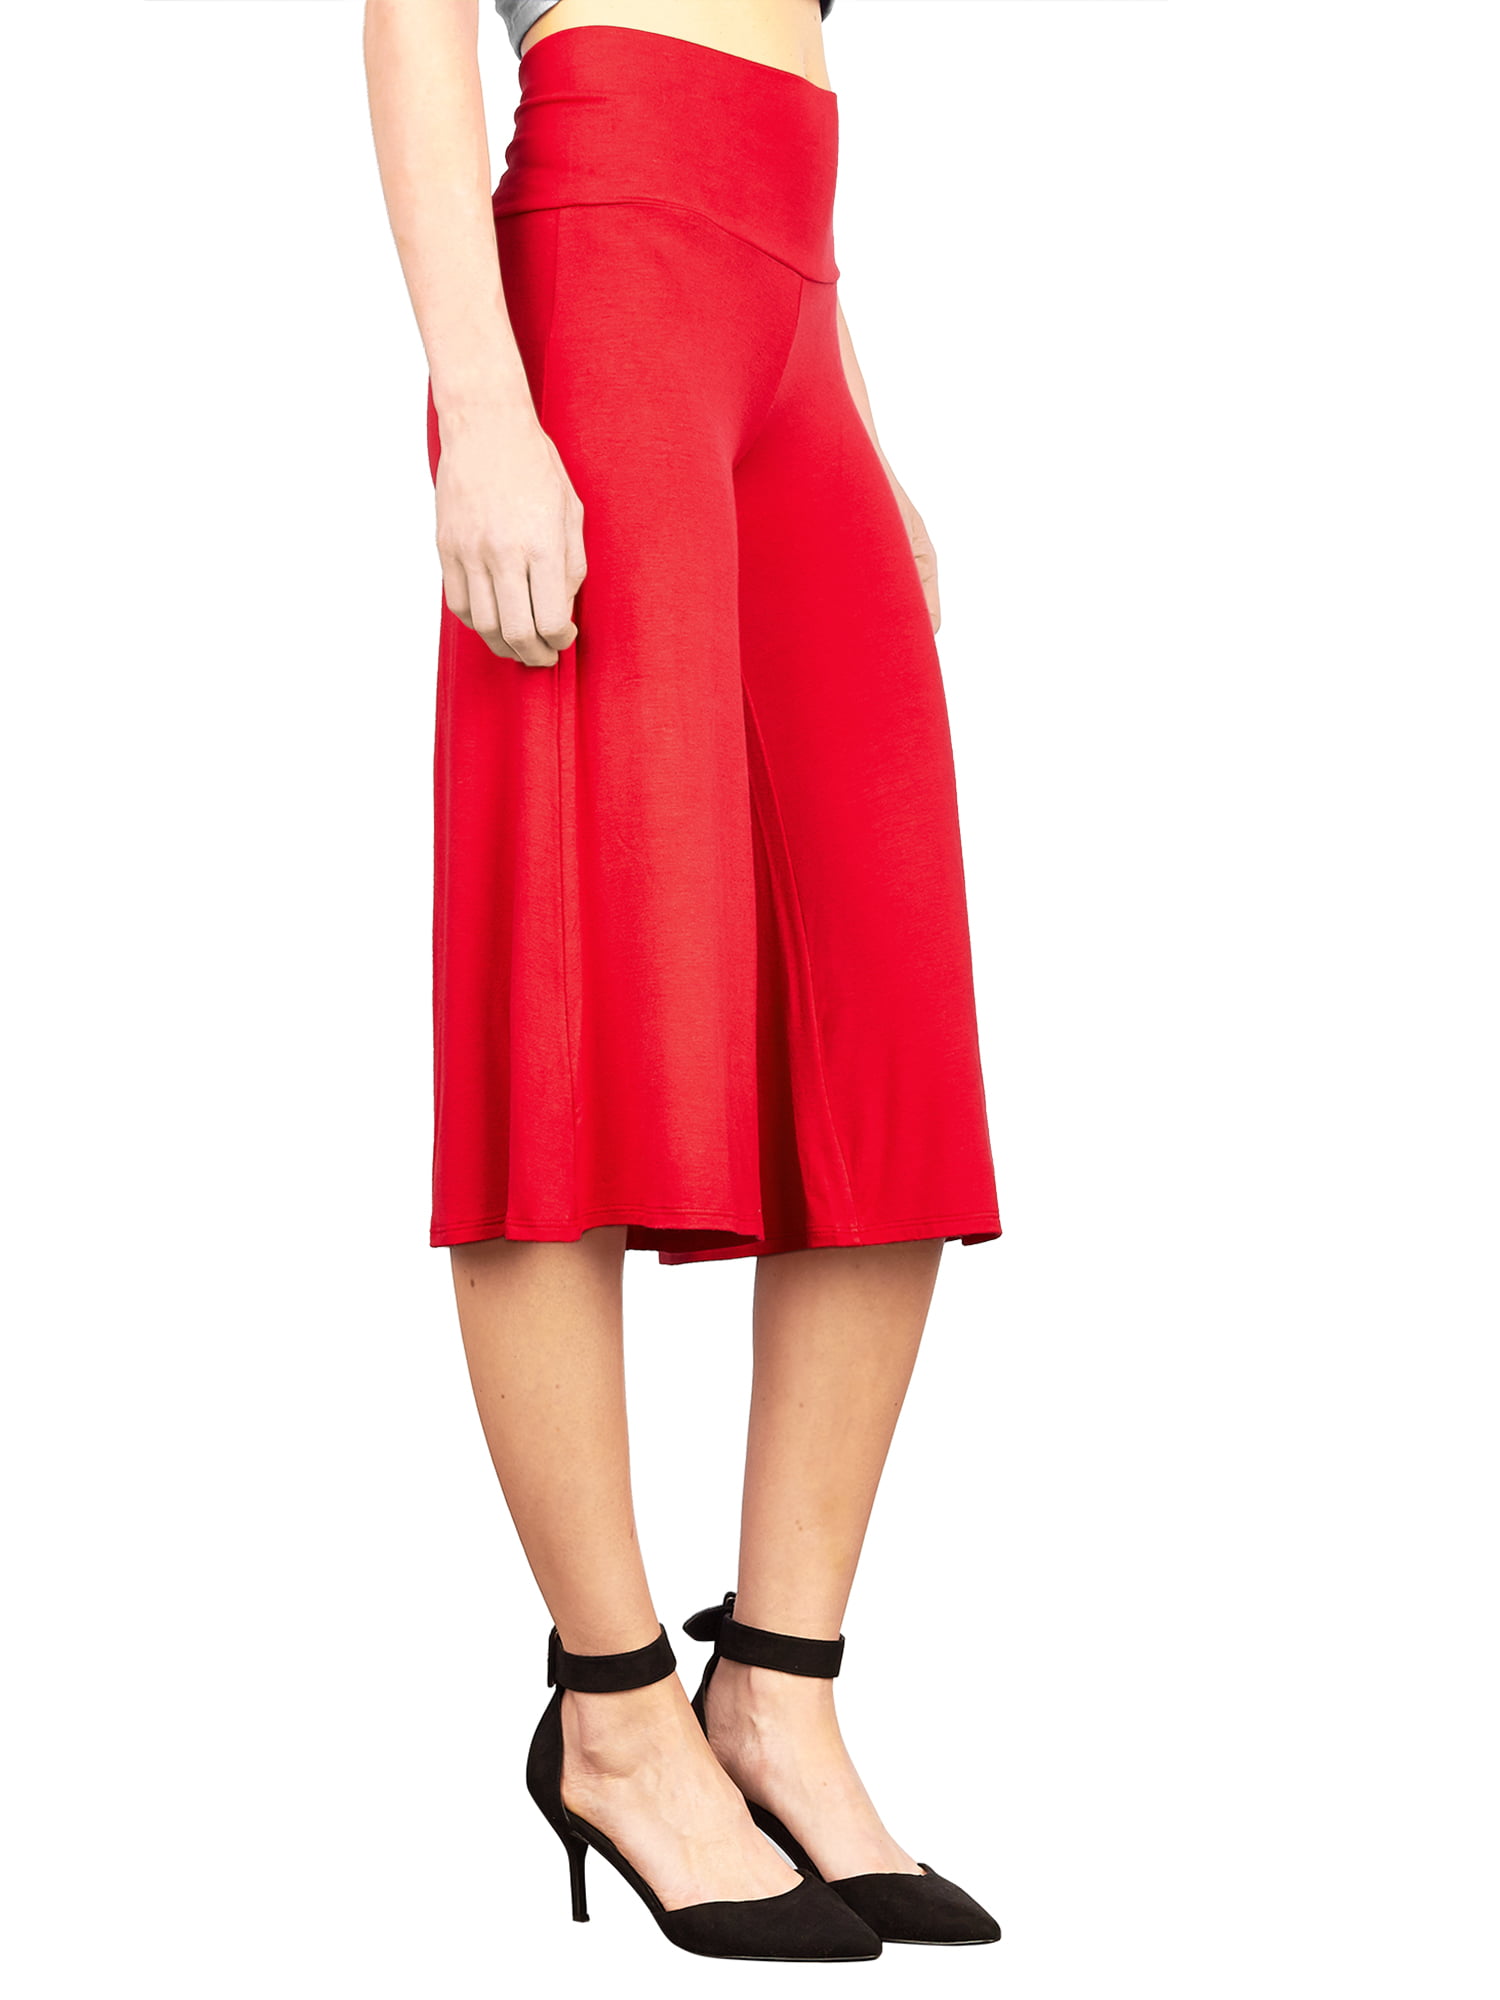 Johnny Culottes Made by RED Knit L Pants Women\'s